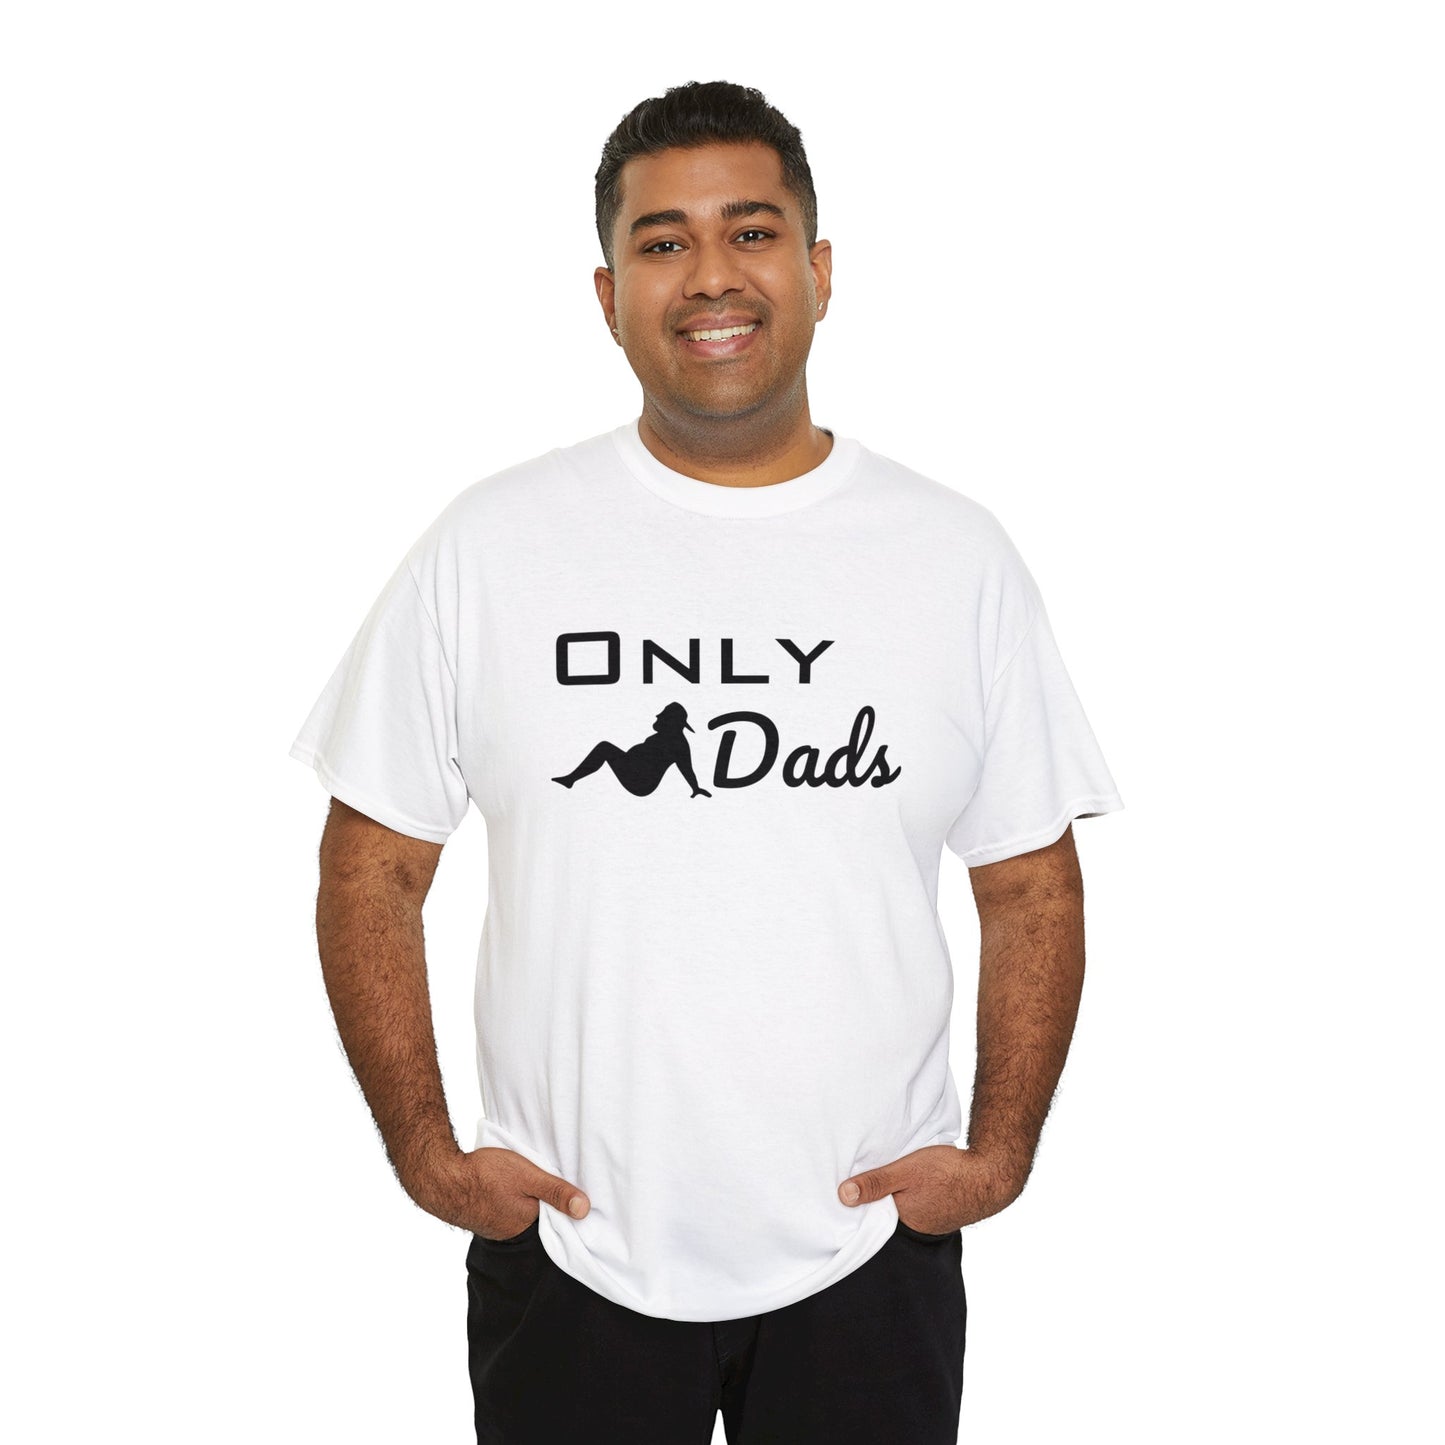 Only Dads: T-Shirt